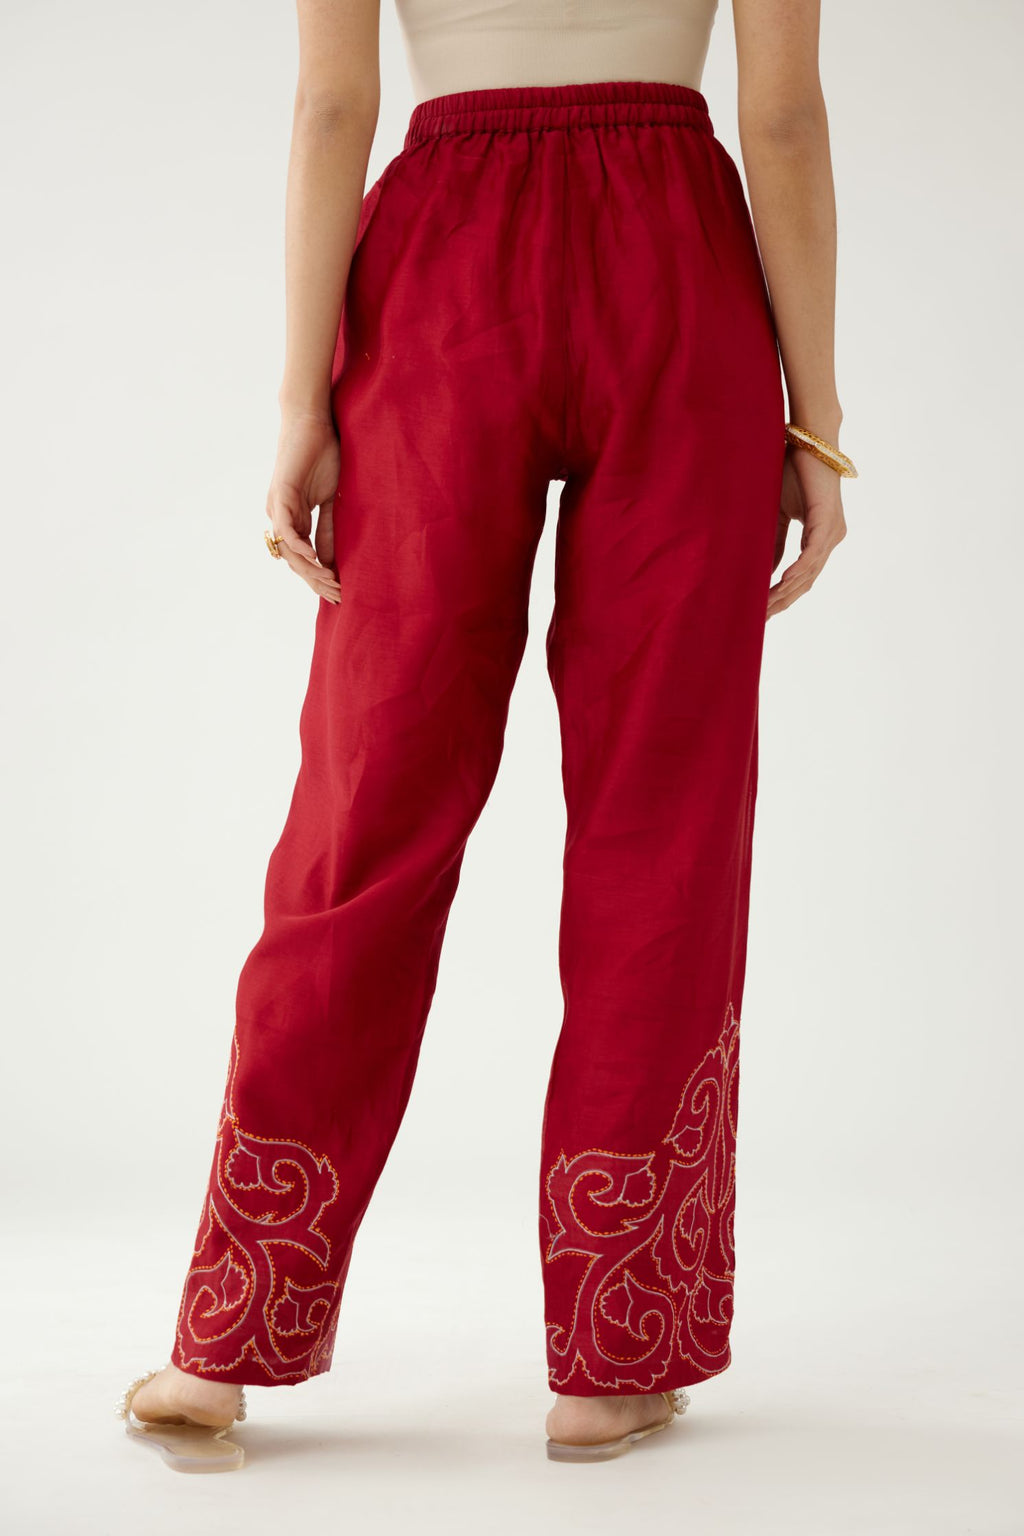 Red silk chanderi straight pants with cotton appliqué jaal work at reverse side, highlighted with kantha work in front side at bottom hem.